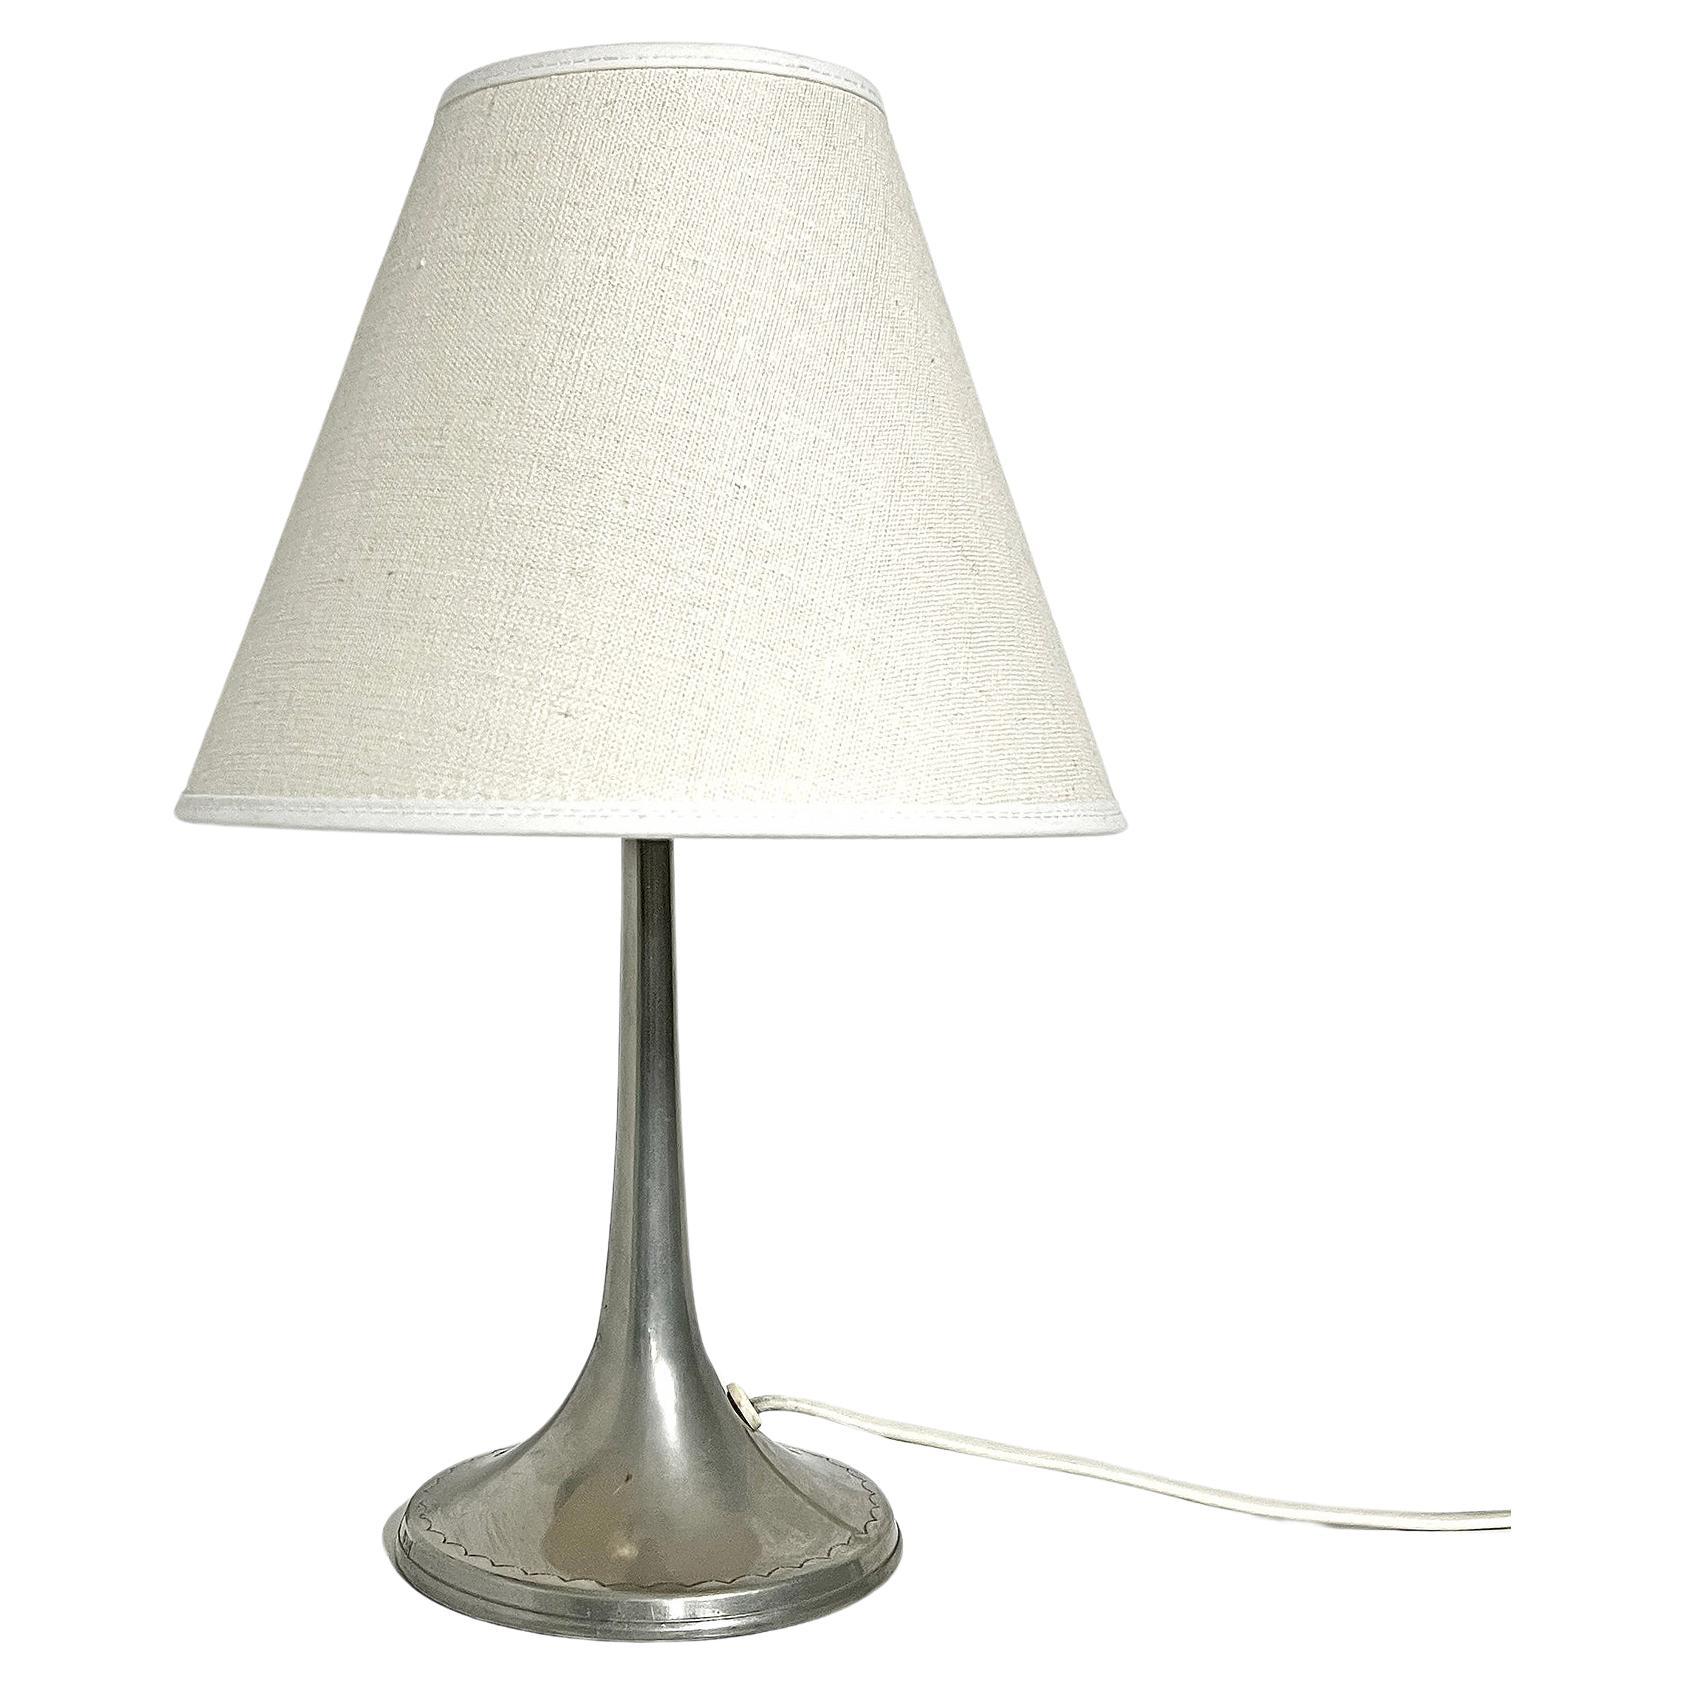 Scandinavian Modern Table Lamp In Pewter by Thorild Knutsson -1930 For Sale